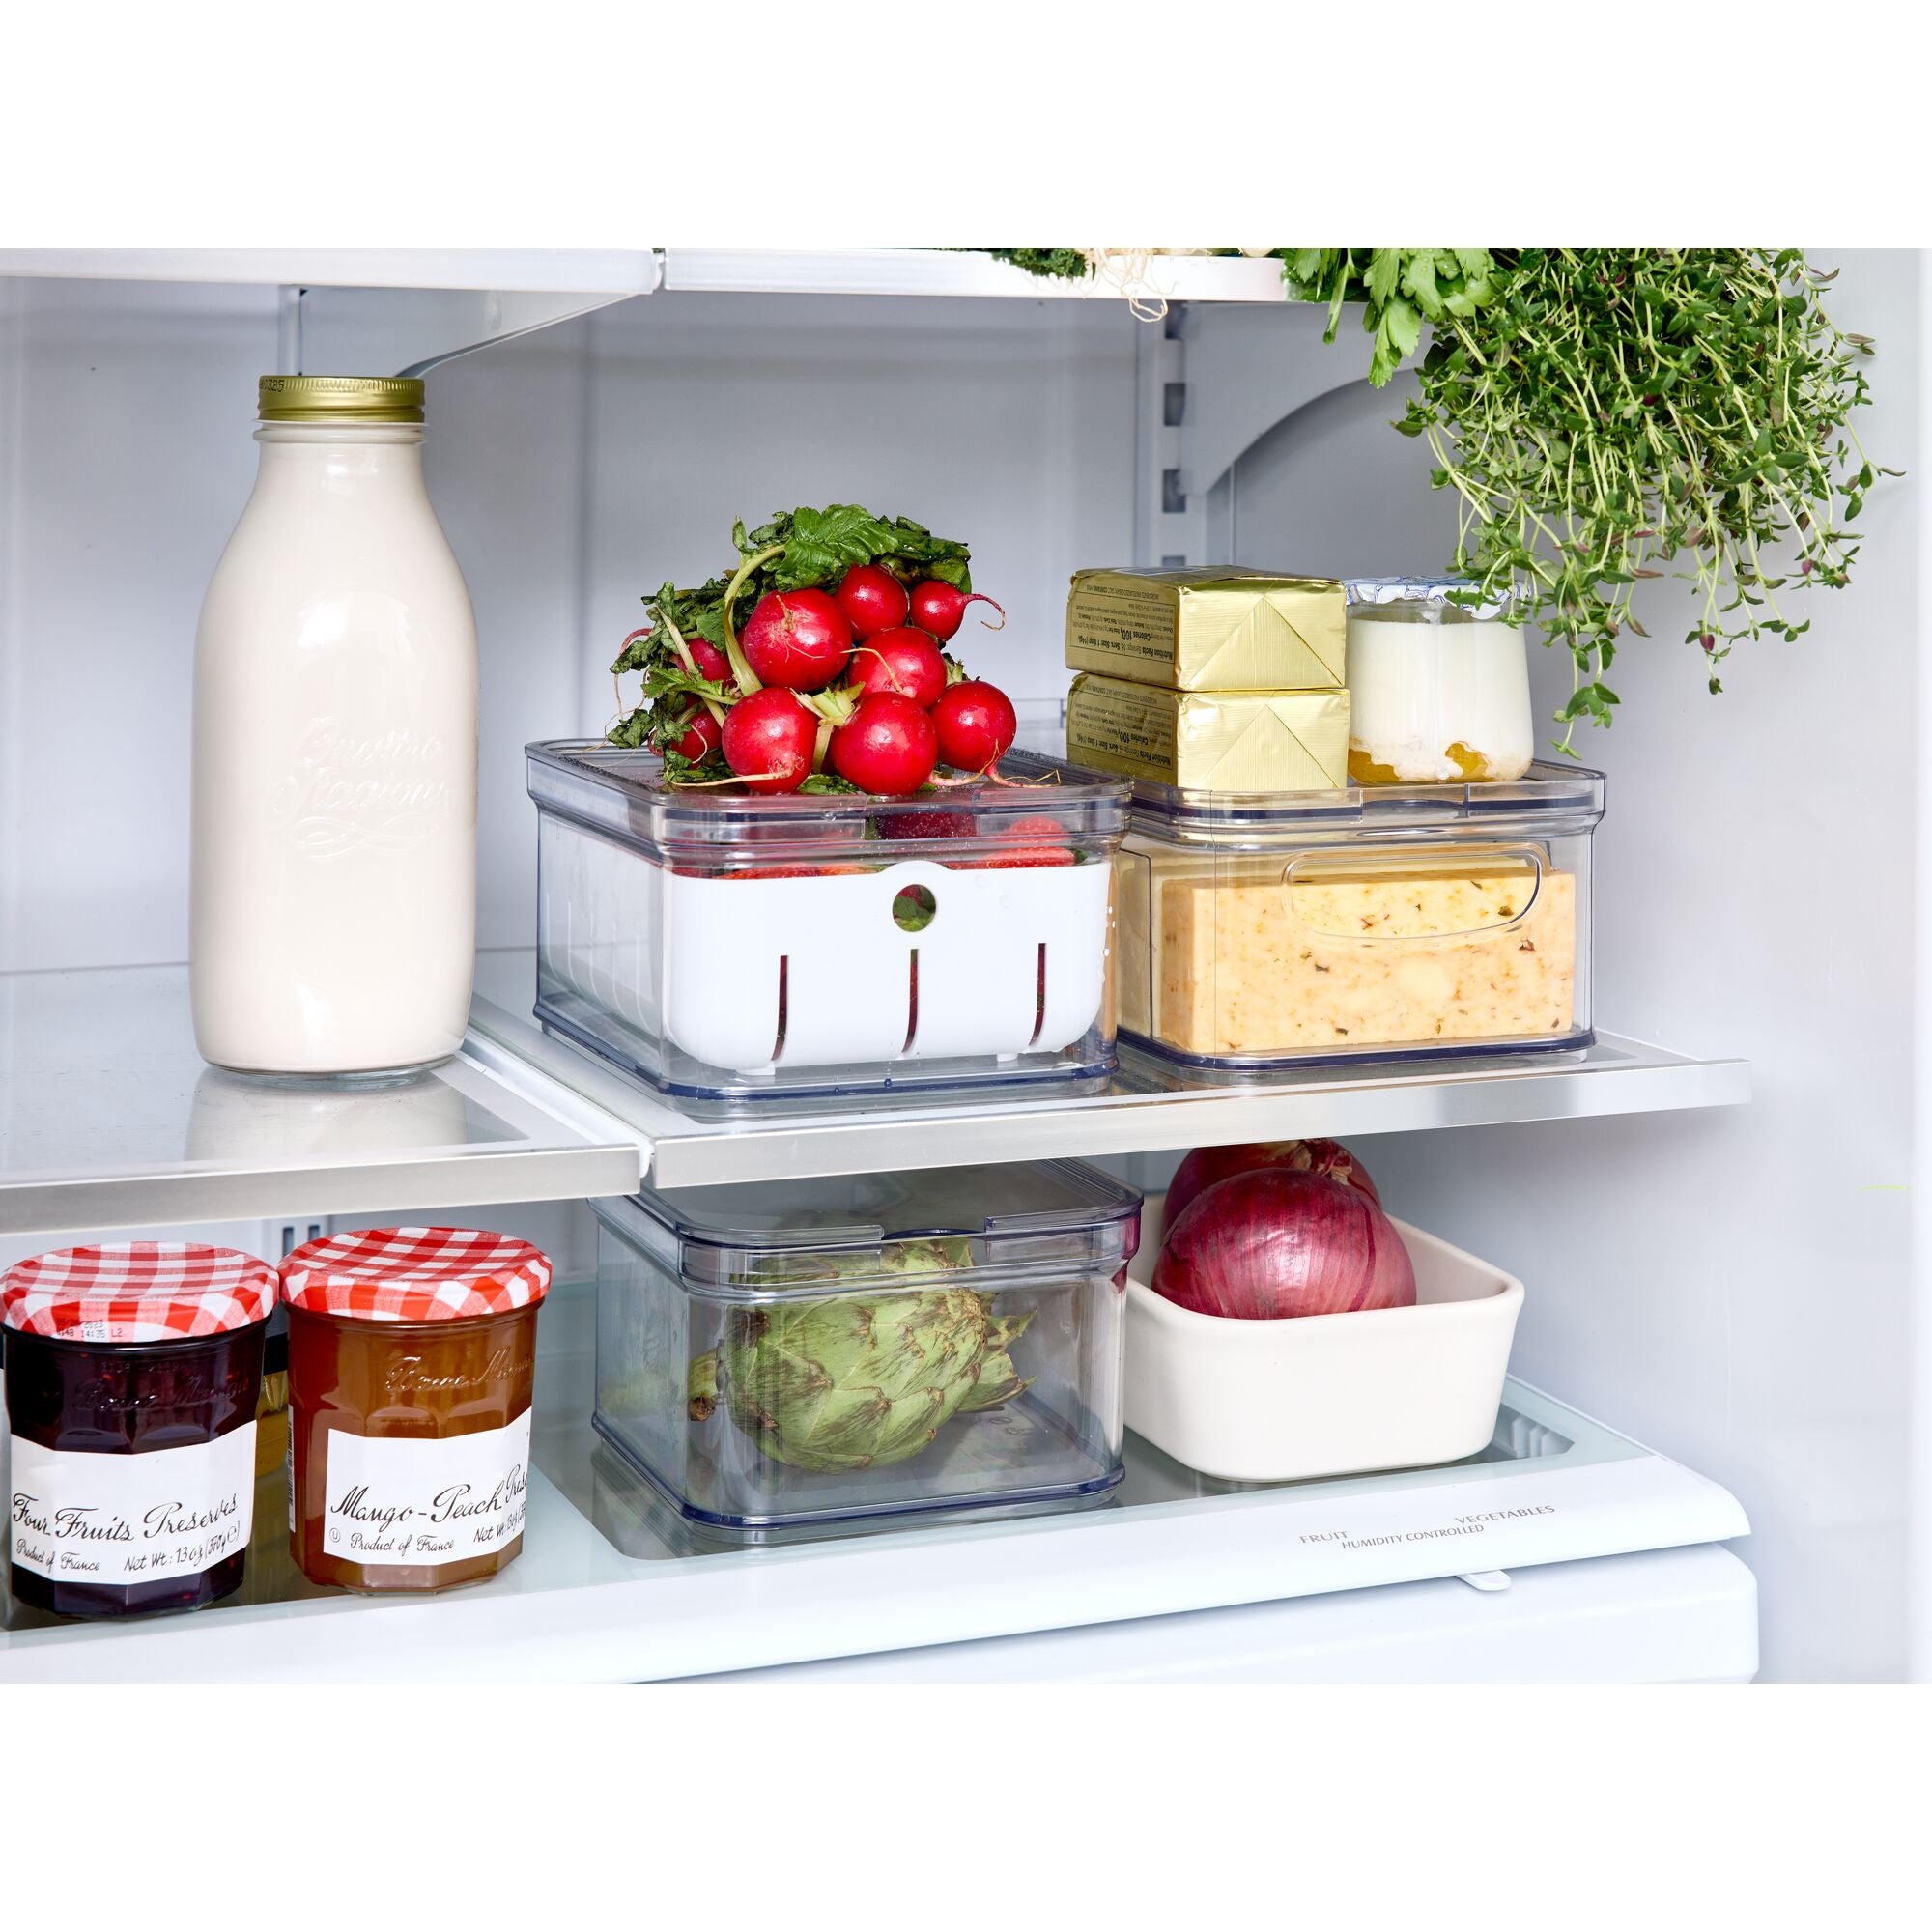 3pcs Big Plastic Kitchen Organizer Food Container - Storage Bin with  Handles for Refrigerator, Freezer, Cabinet, and Pantry Shelves Organization